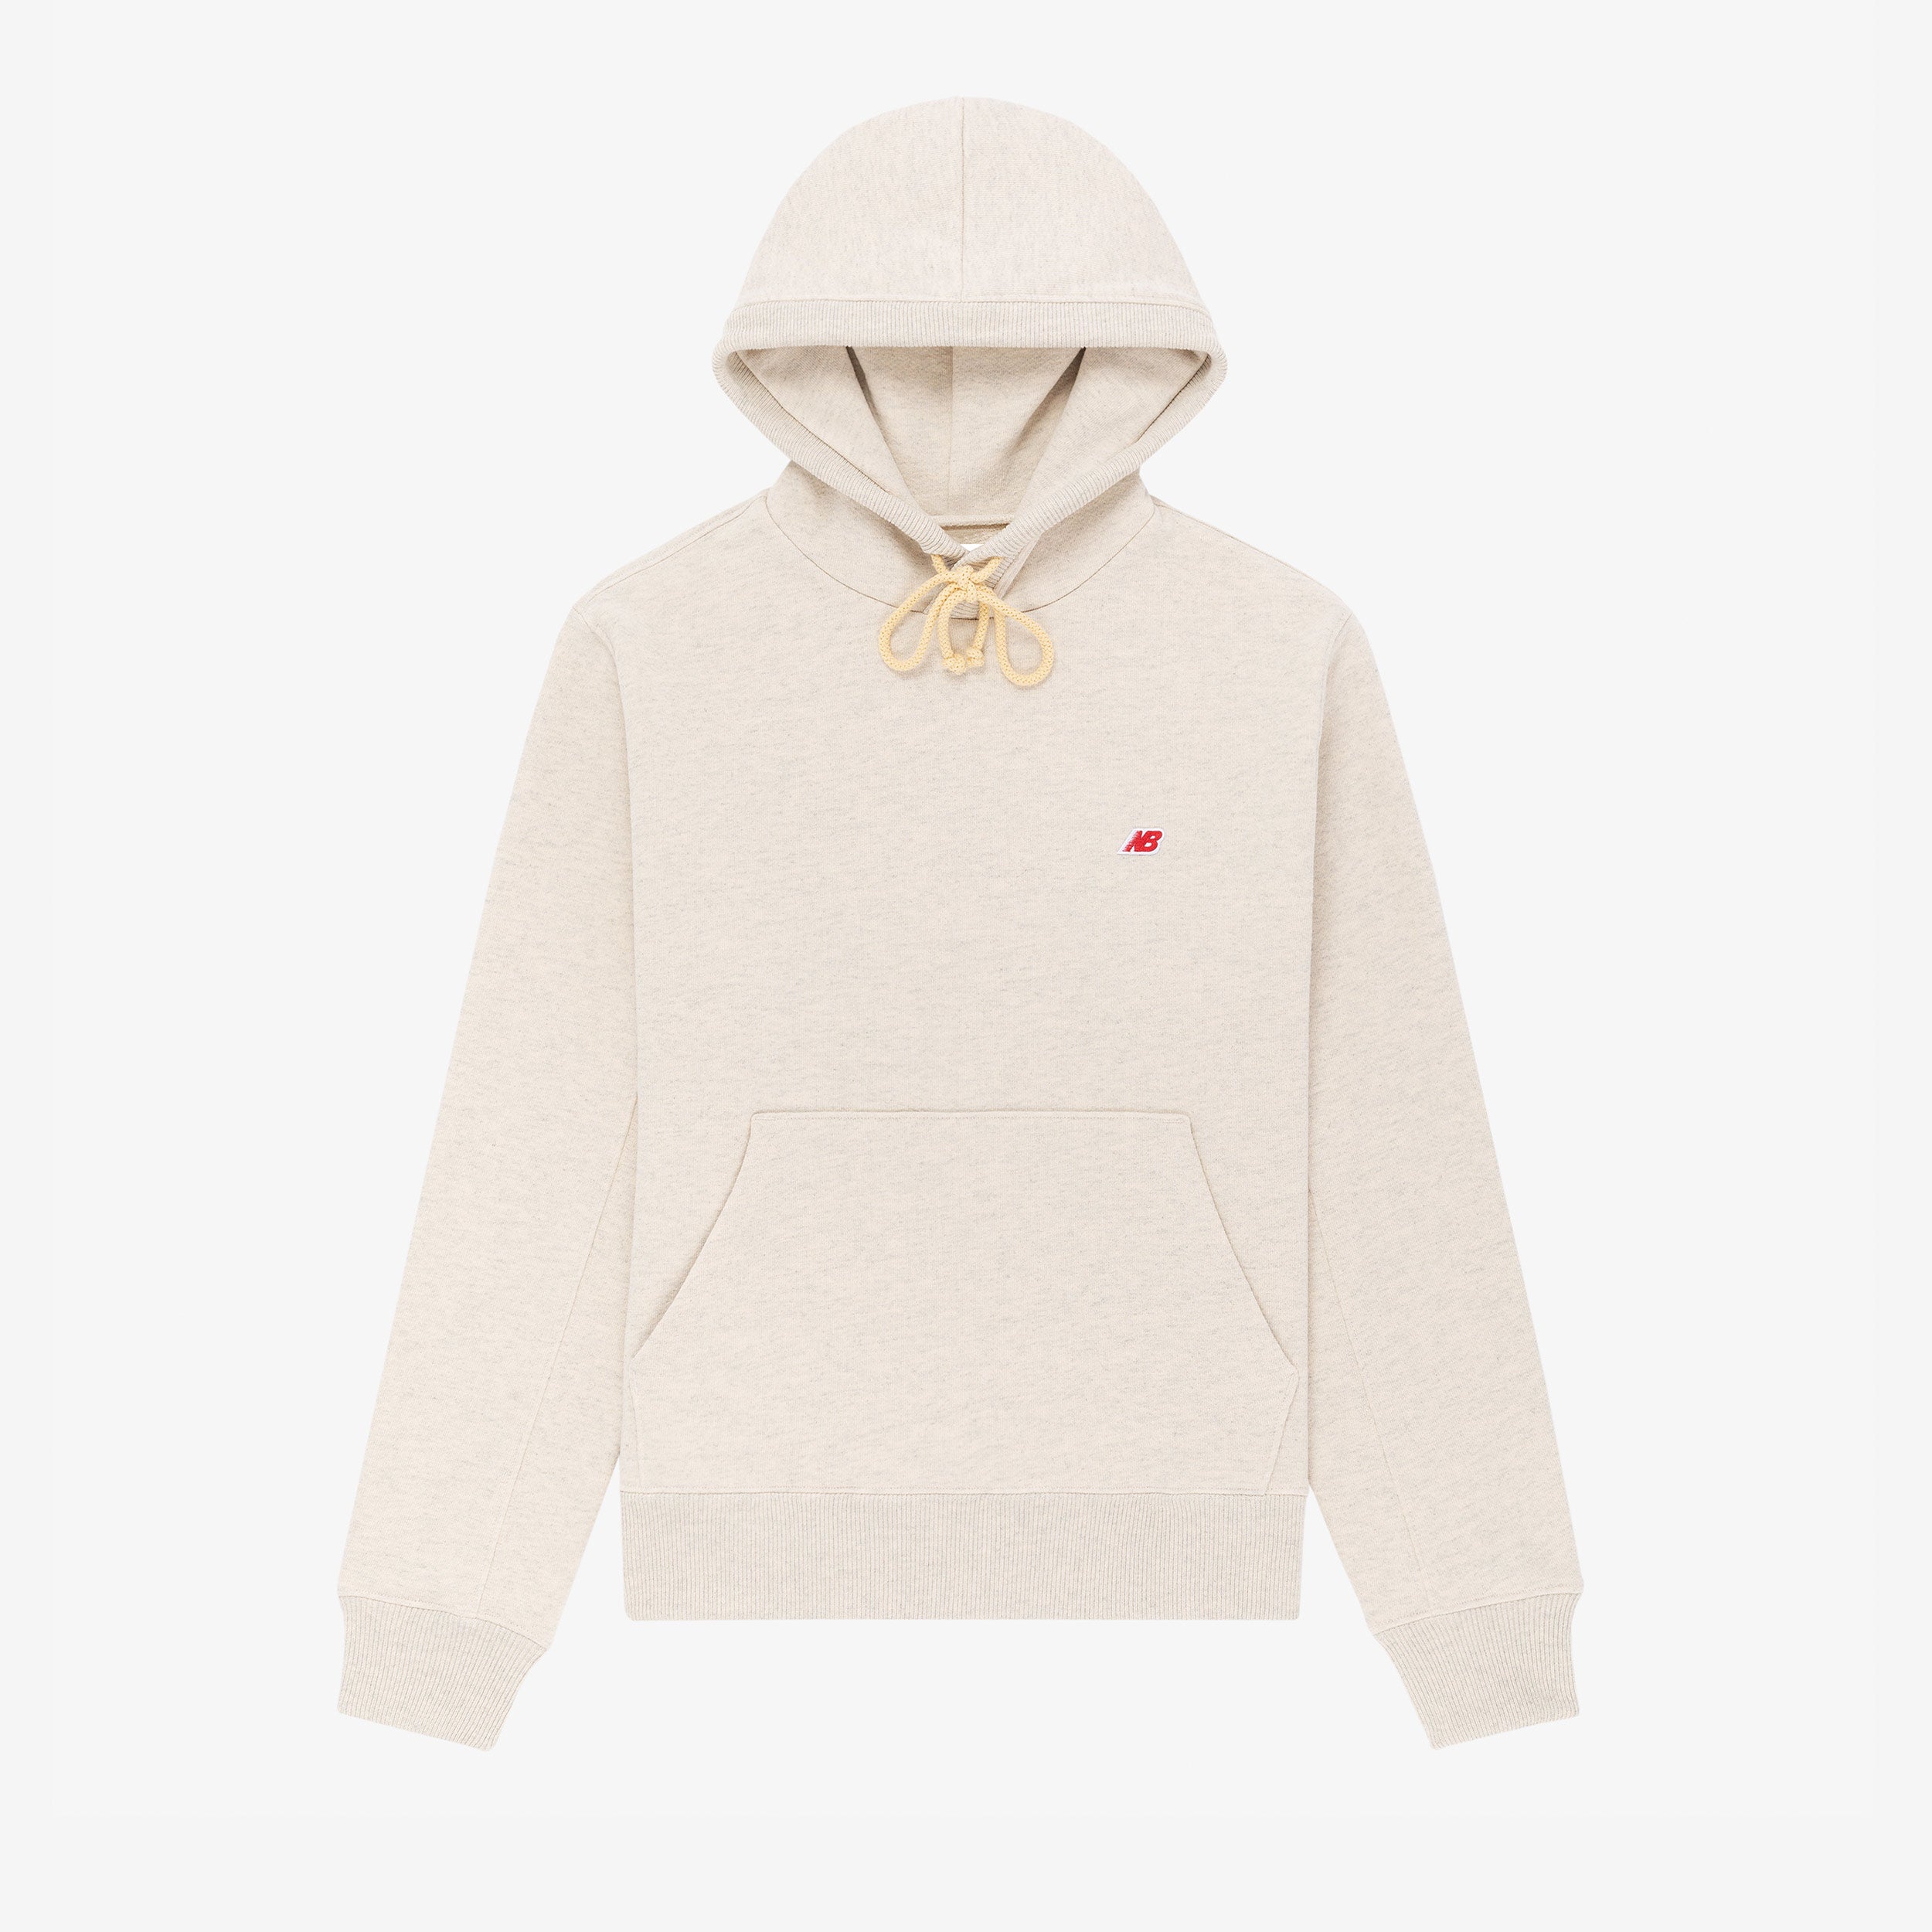 MADE IN USA CORE HOODIE - NATURAL